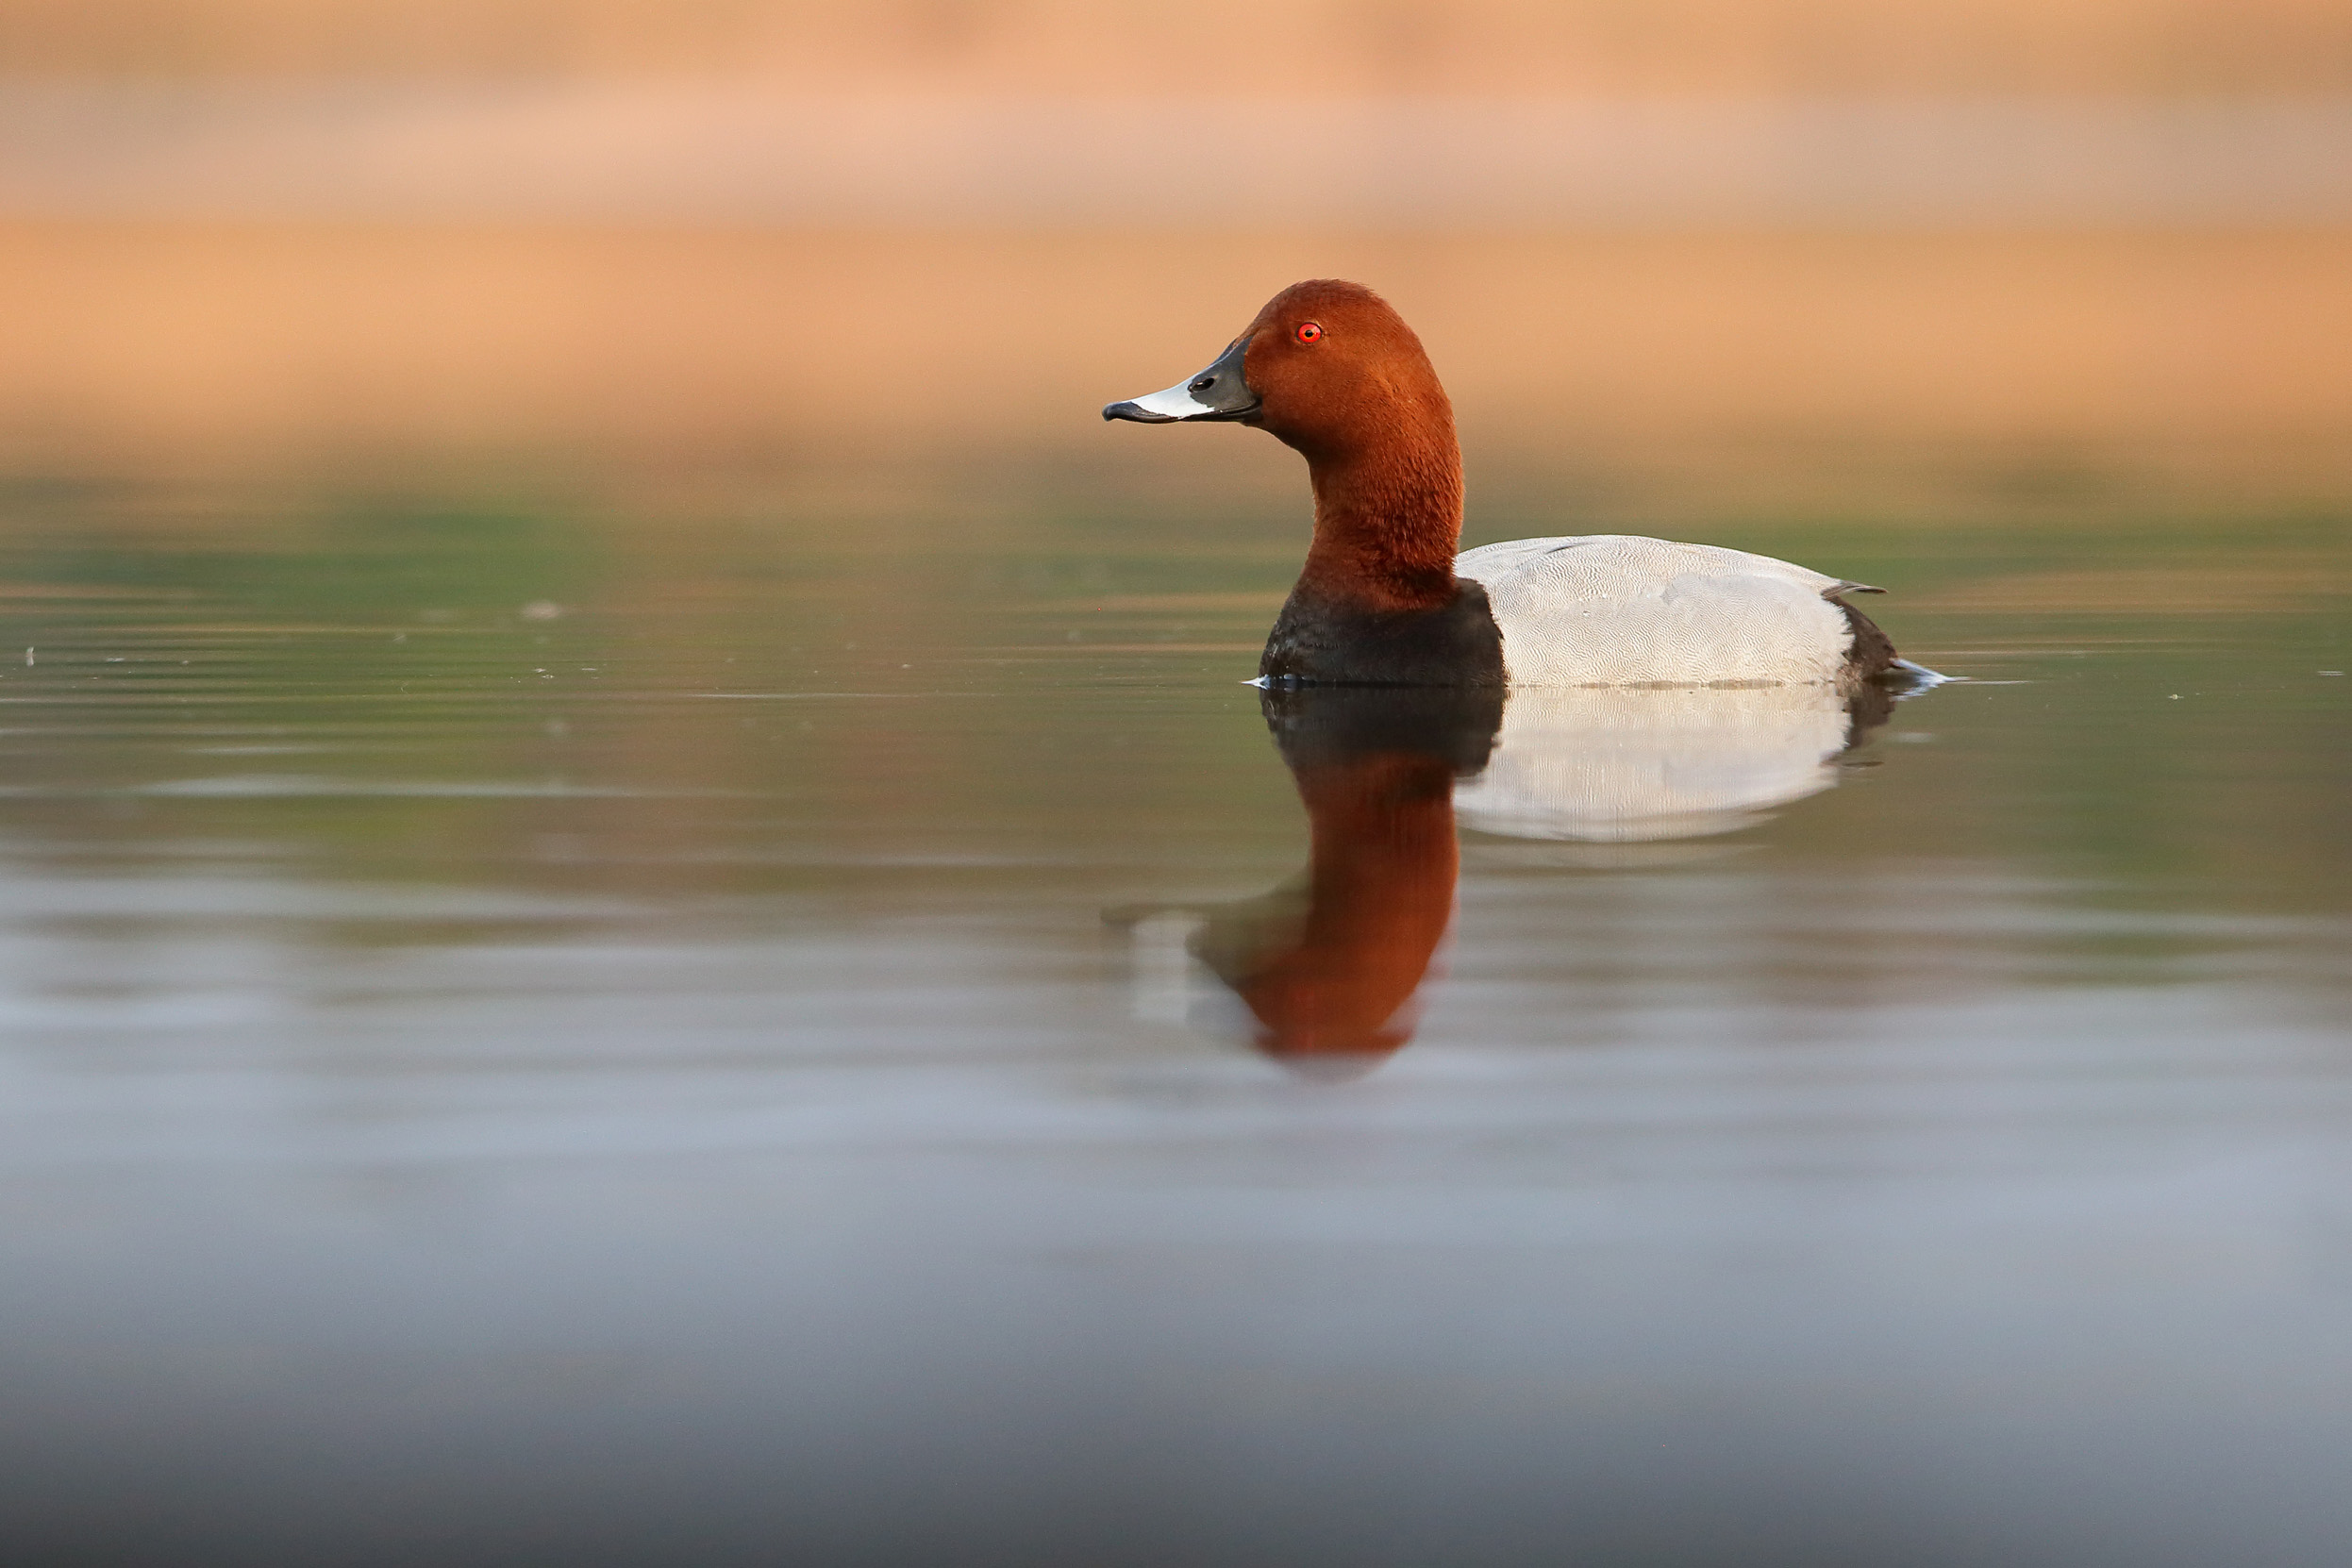 A lone male Common Pochard swimming on a body of water.